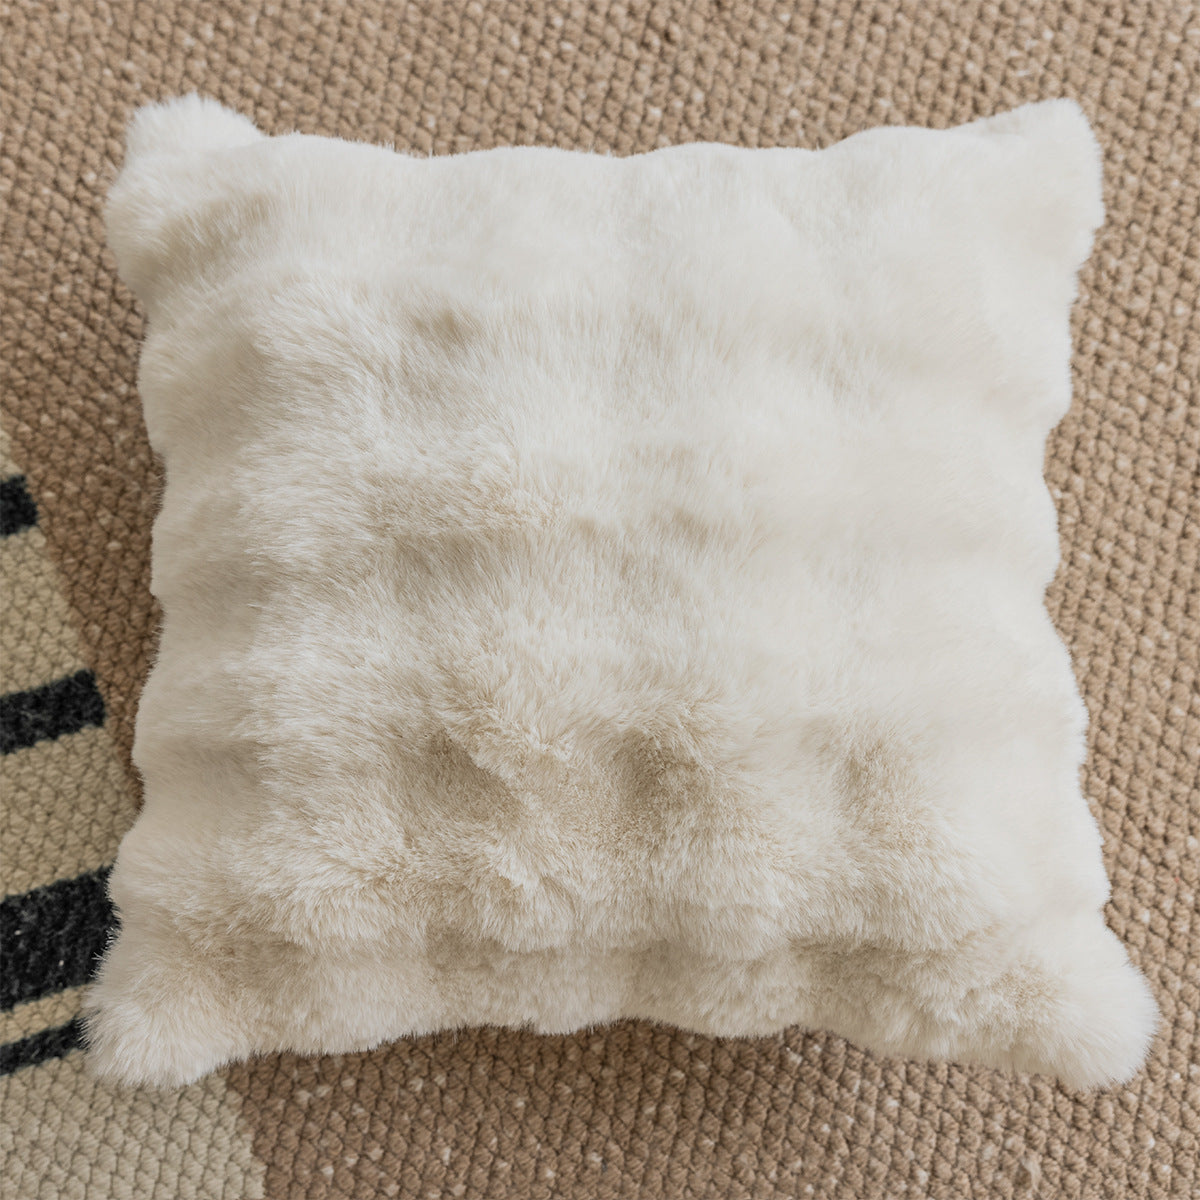 Modern Pillows In The Nordic Design